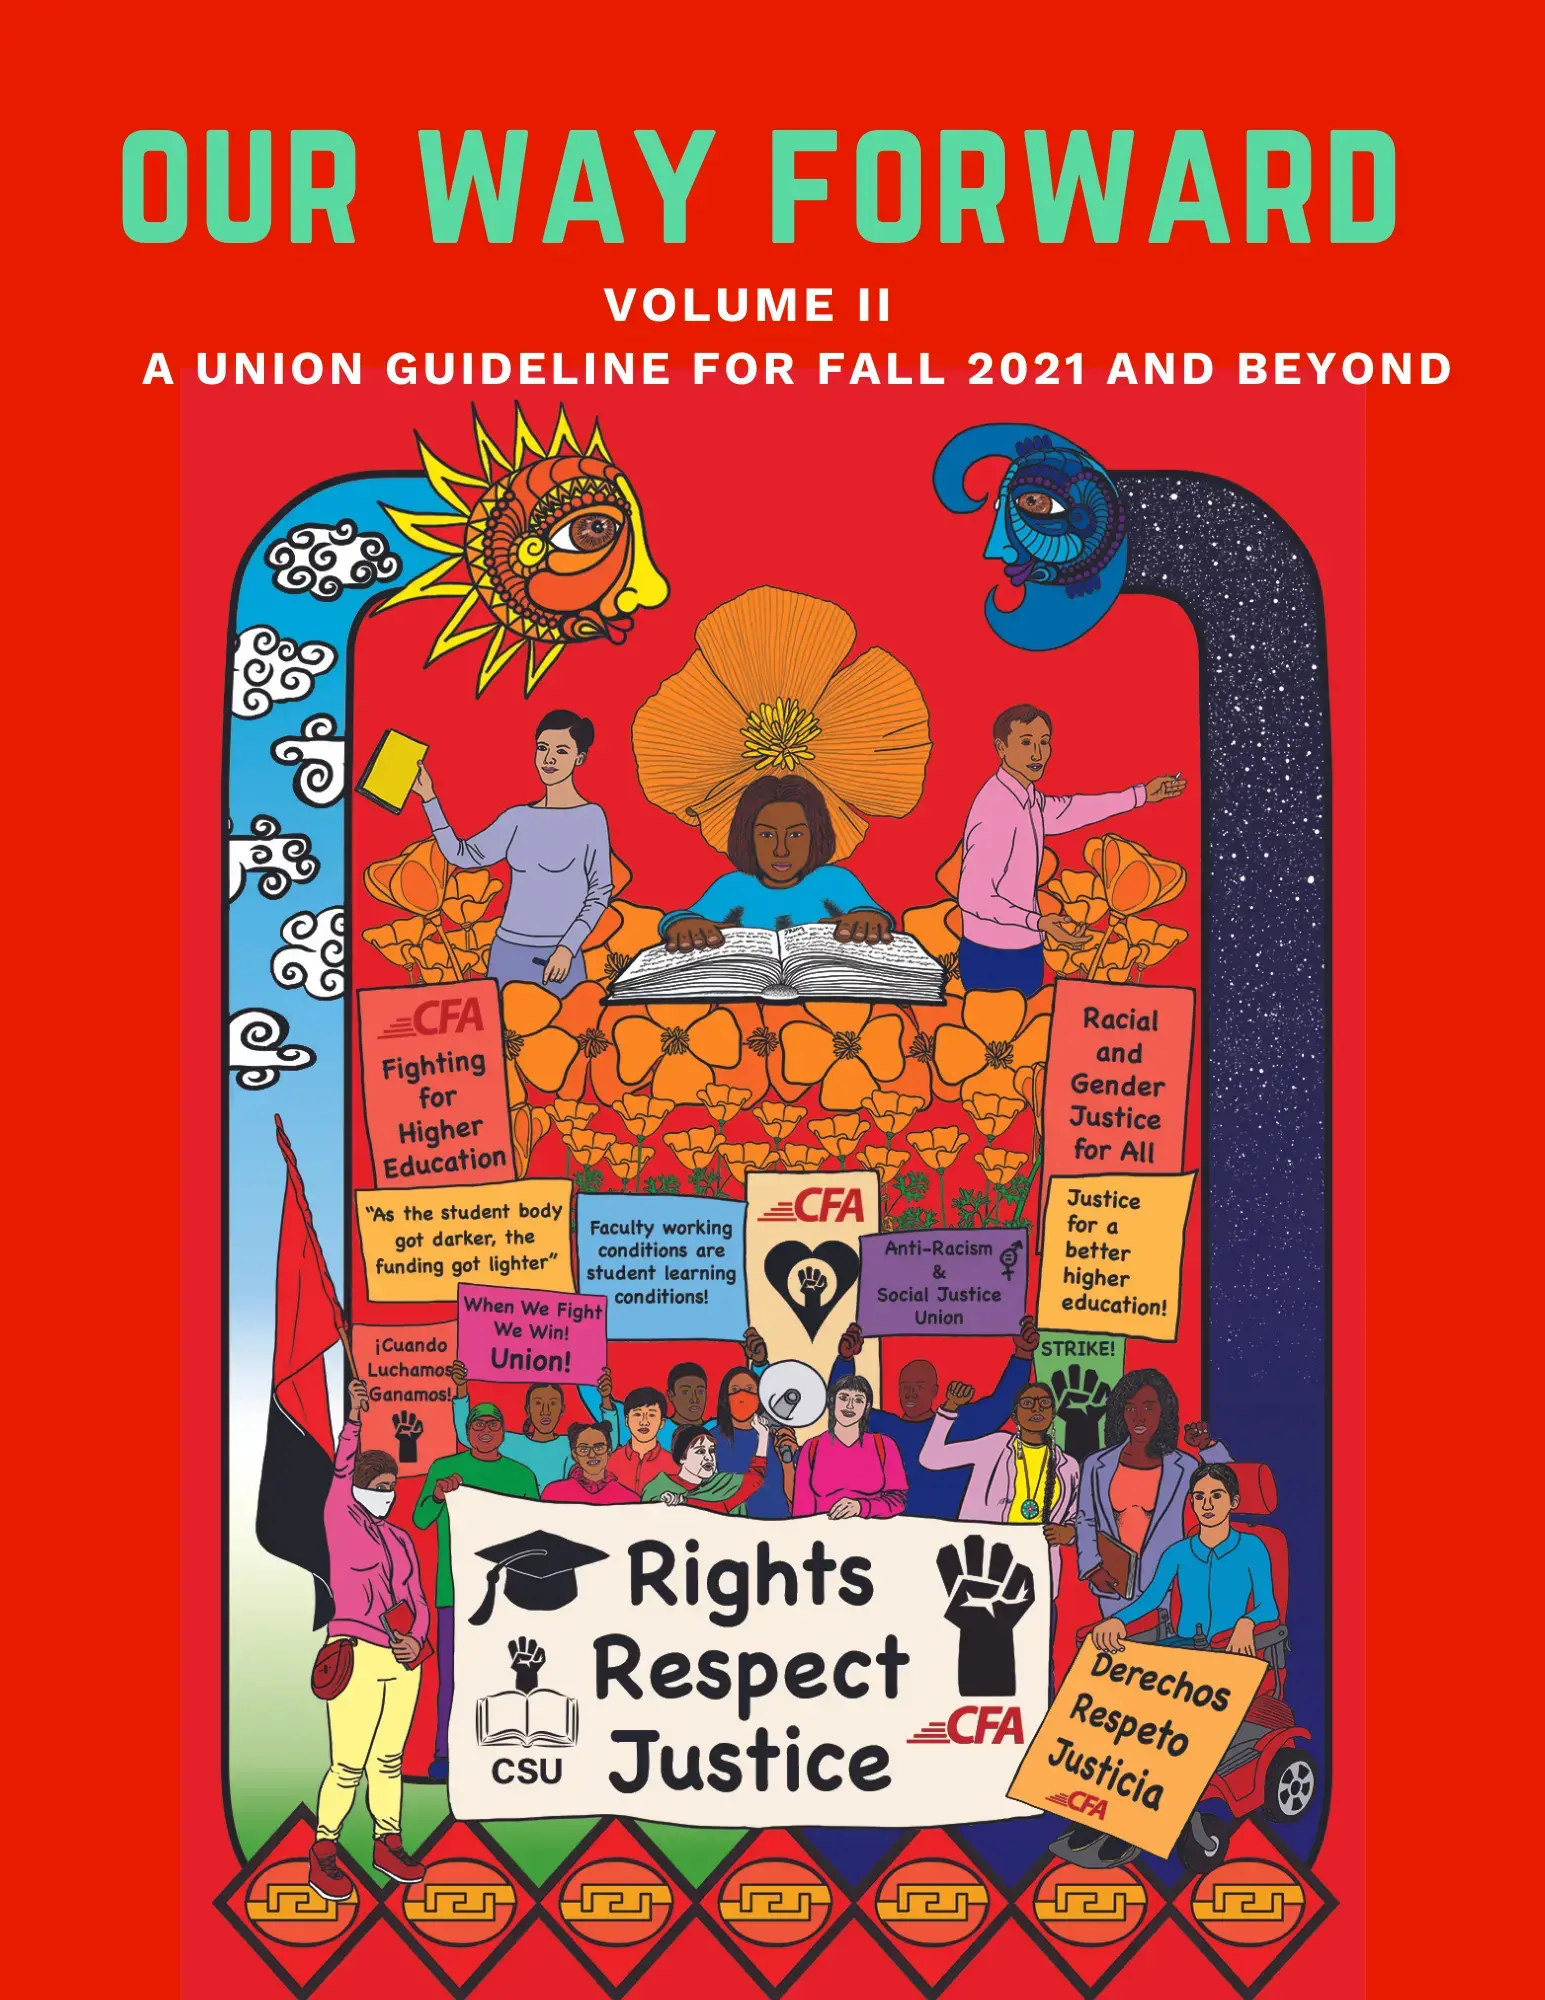 Cover photo for CFA's second edition of Our Way Forward, a union guideline for Fall 2021 and beyond.